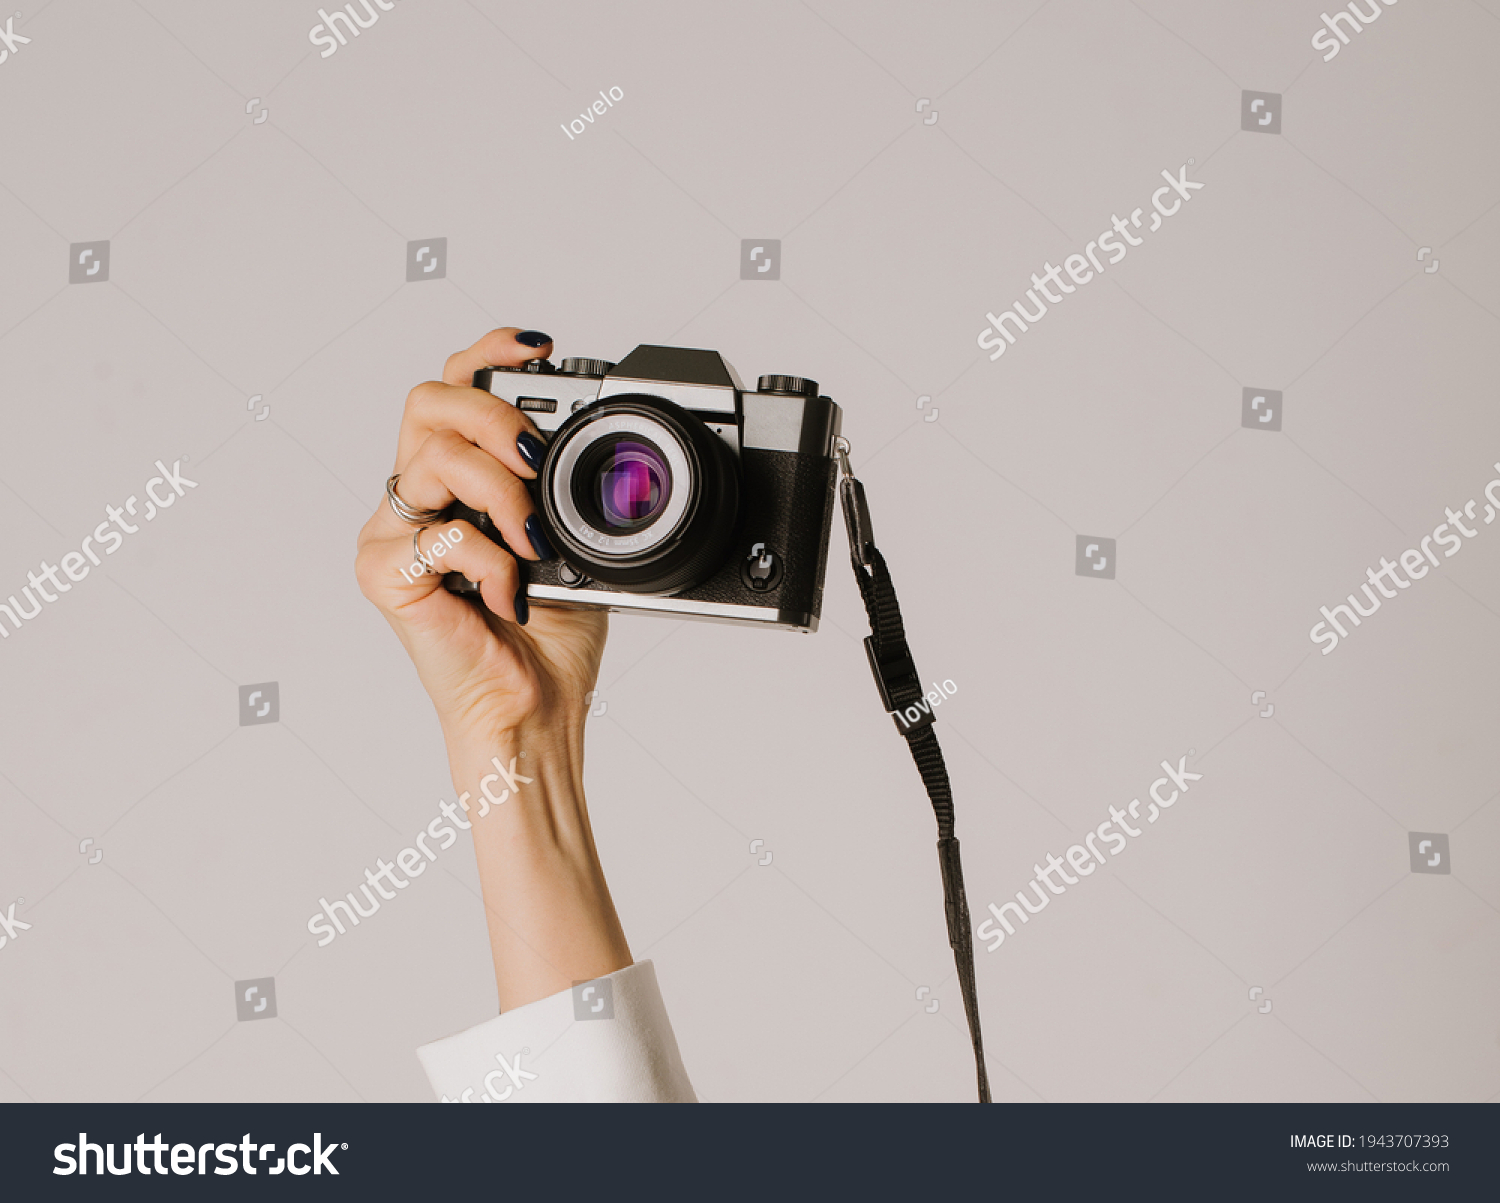 a camera in a woman's hands #1943707393